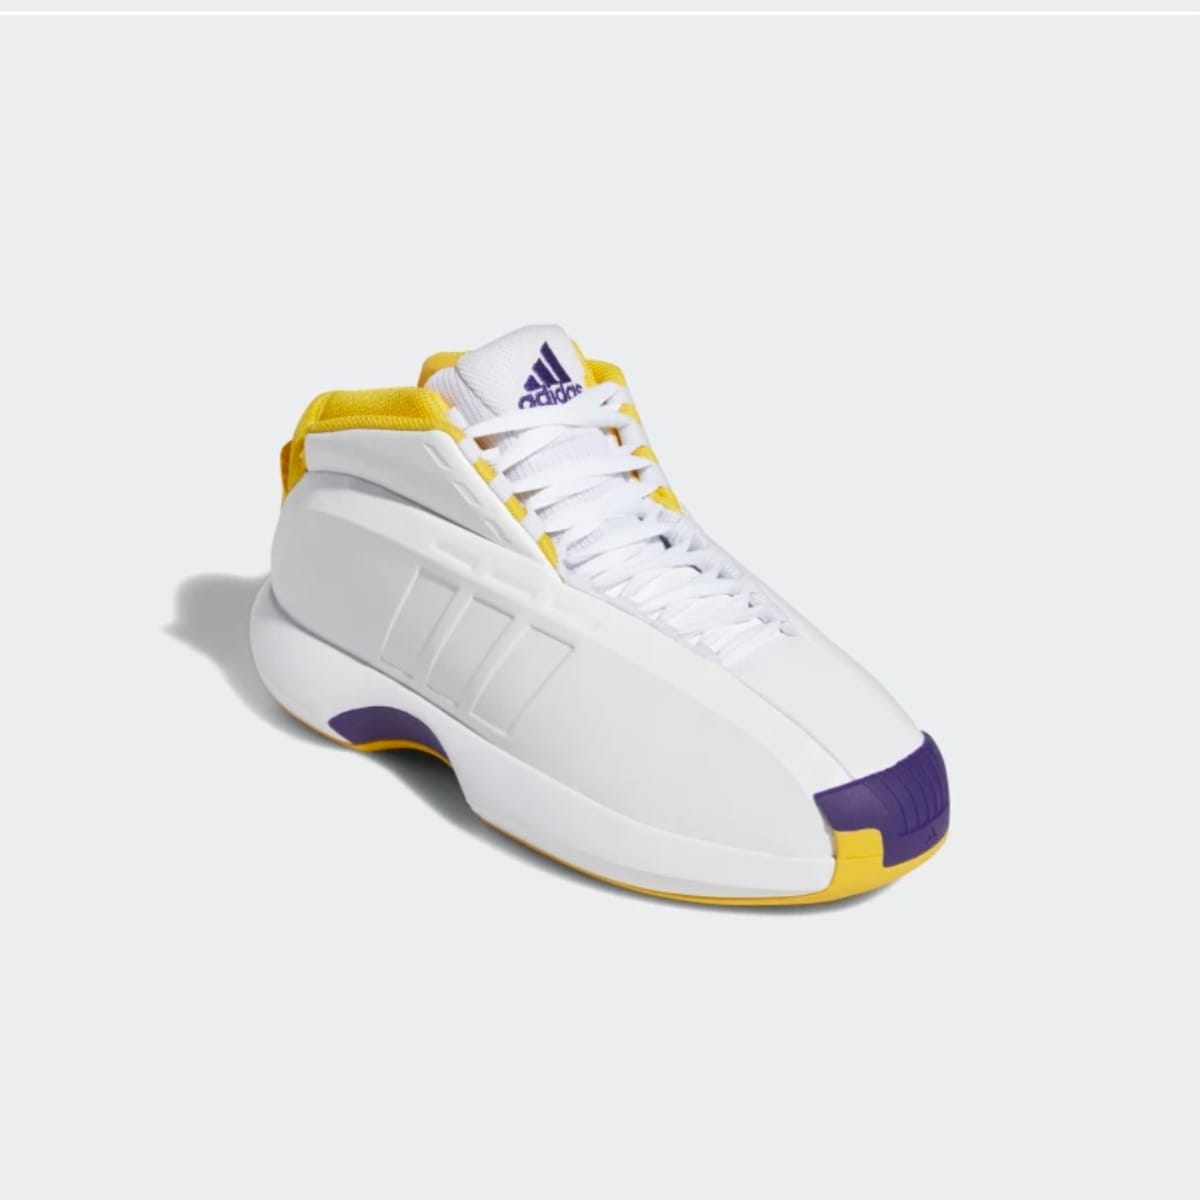 Heb geleerd Bestaan zuur Adidas Crazy 1 'Lakers' Release Information - Sports Illustrated FanNation  Kicks News, Analysis and More